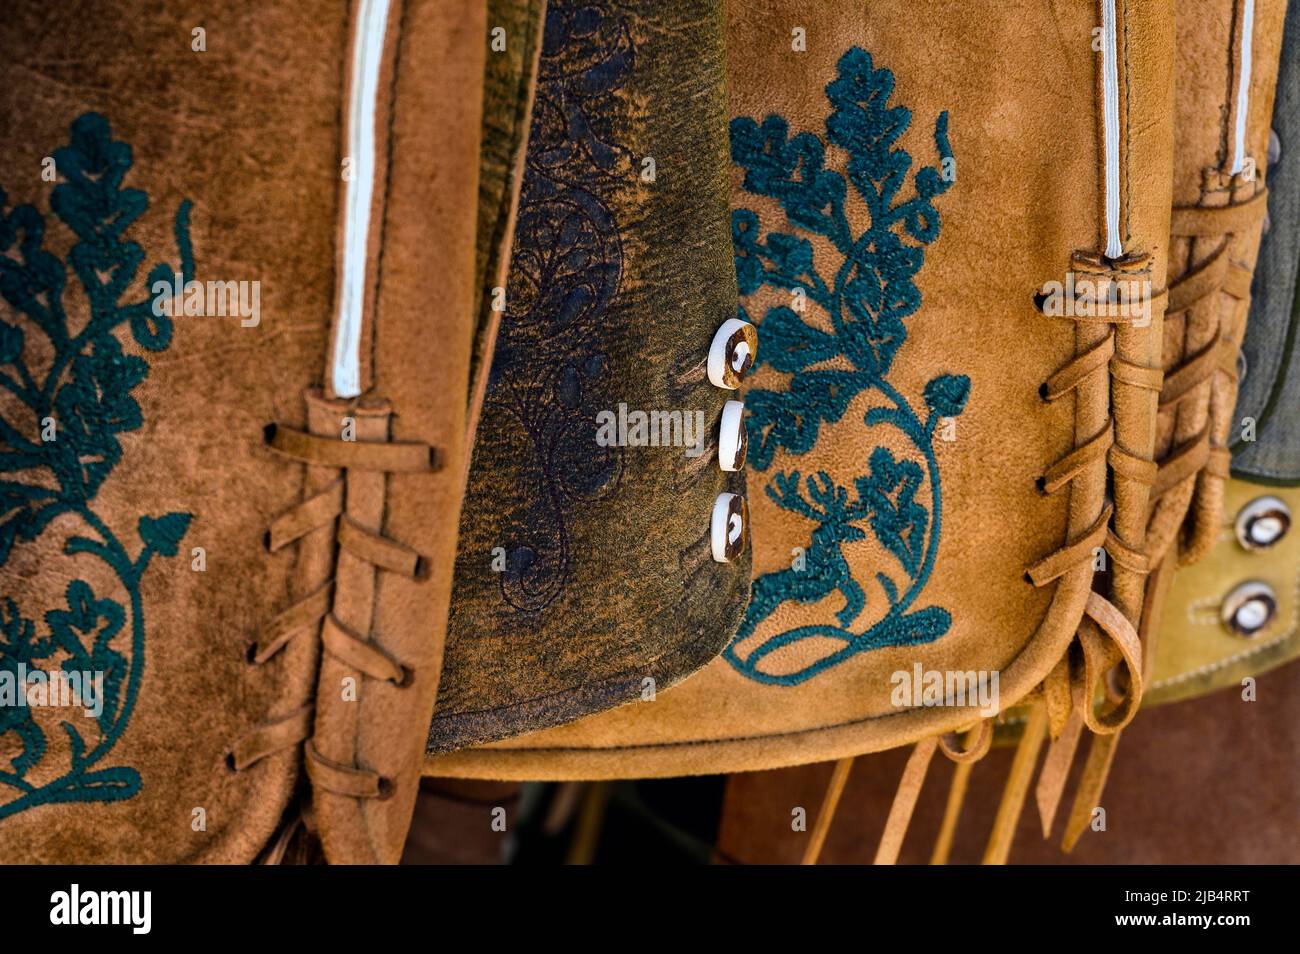 Embroidery and staghorn buttons on leather trousers, Oberstaufen, Allgaeu, Bavaria, Germany Stock Photo